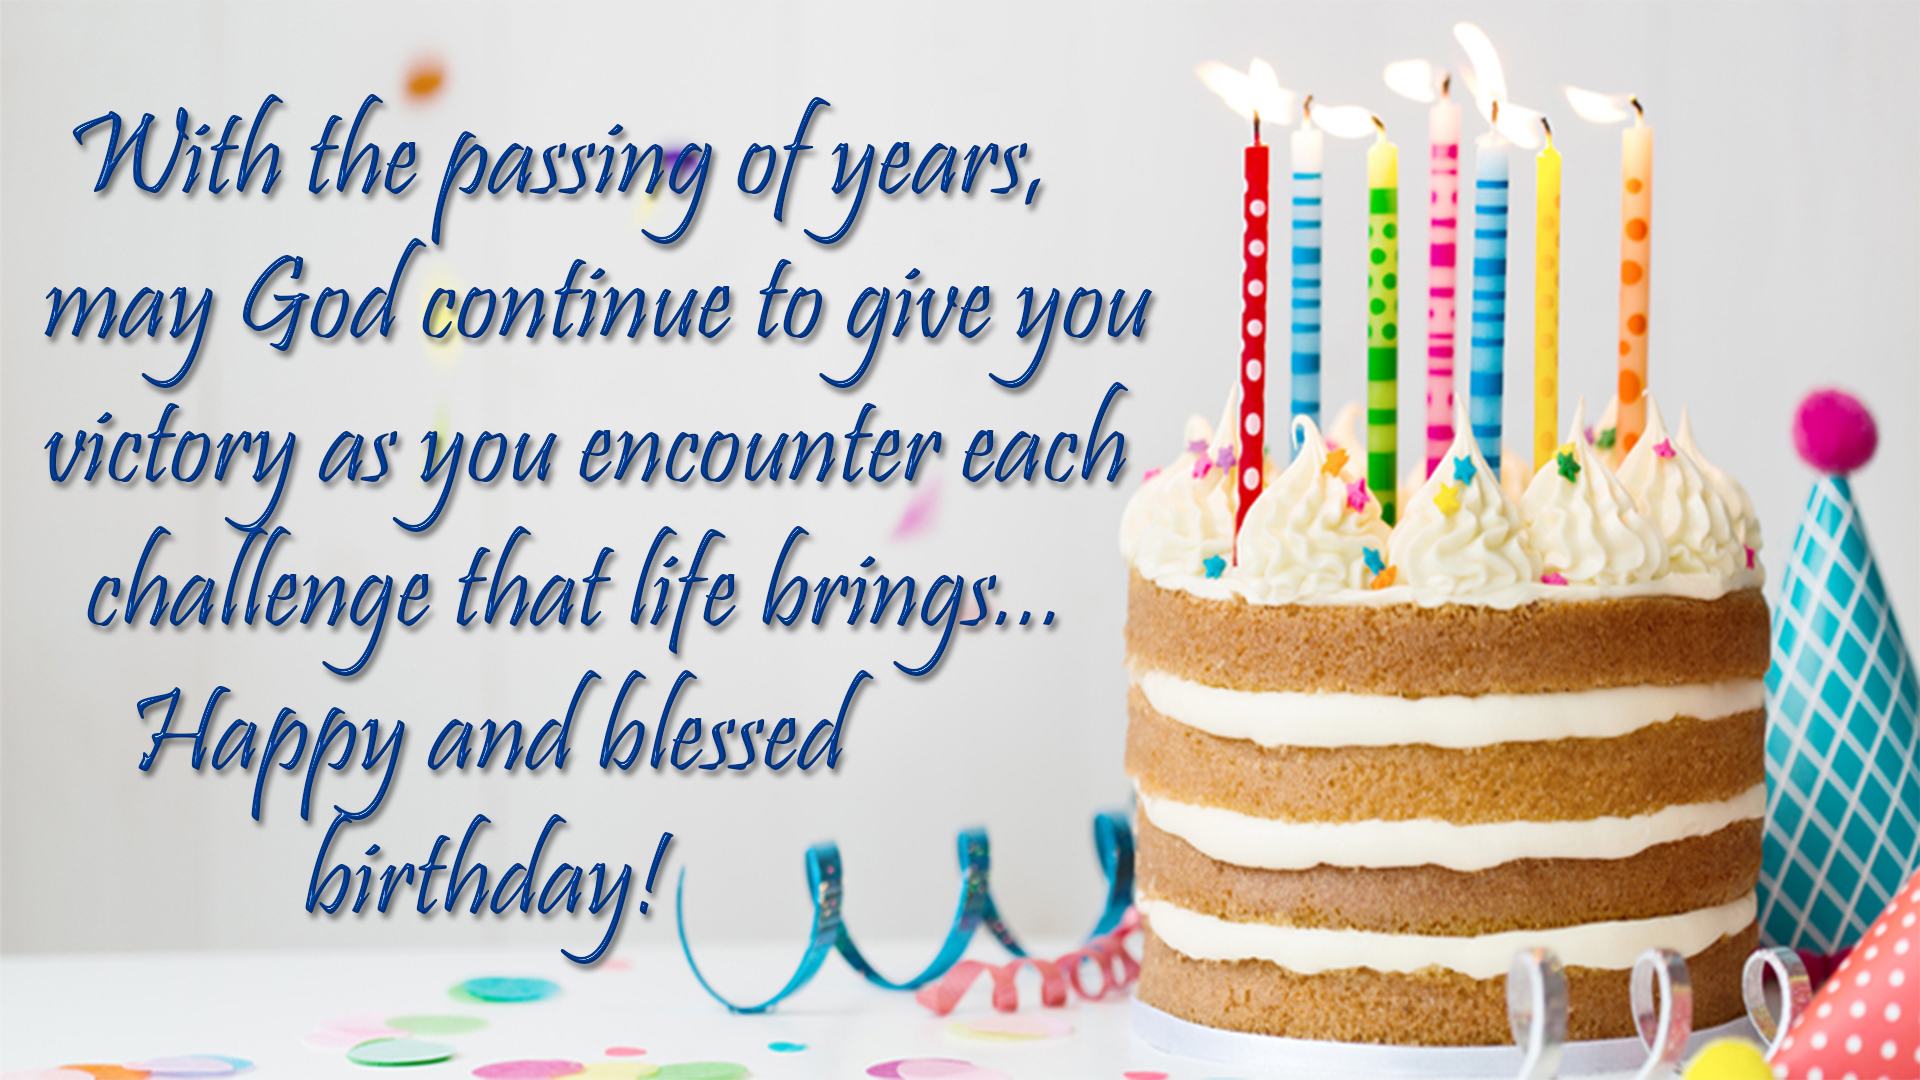 Beautiful Birthday Blessings & Wishes Images